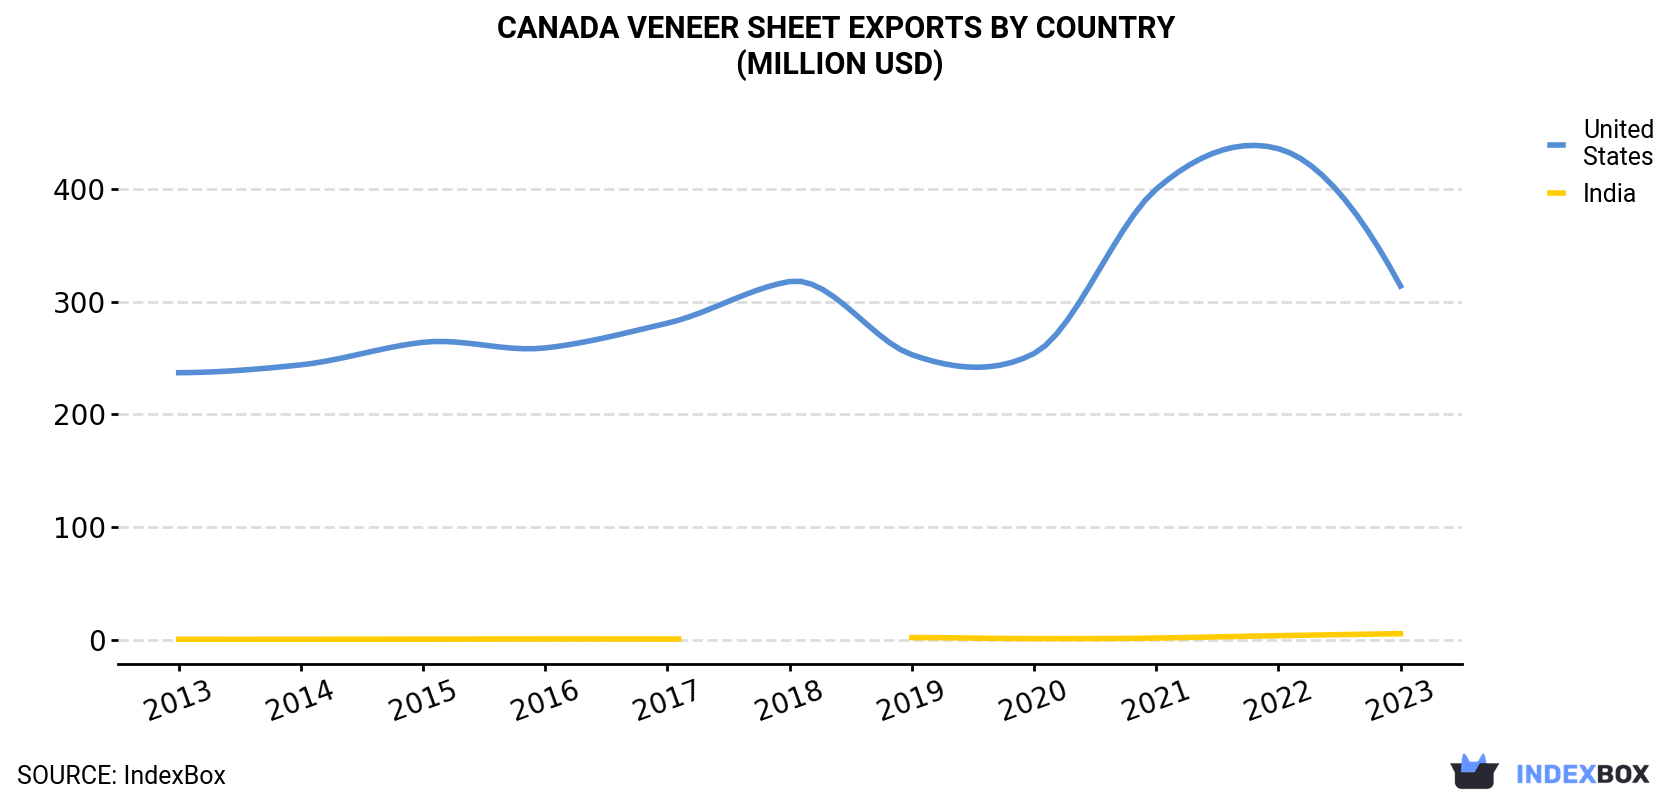 Canada Veneer Sheet Exports By Country (Million USD)